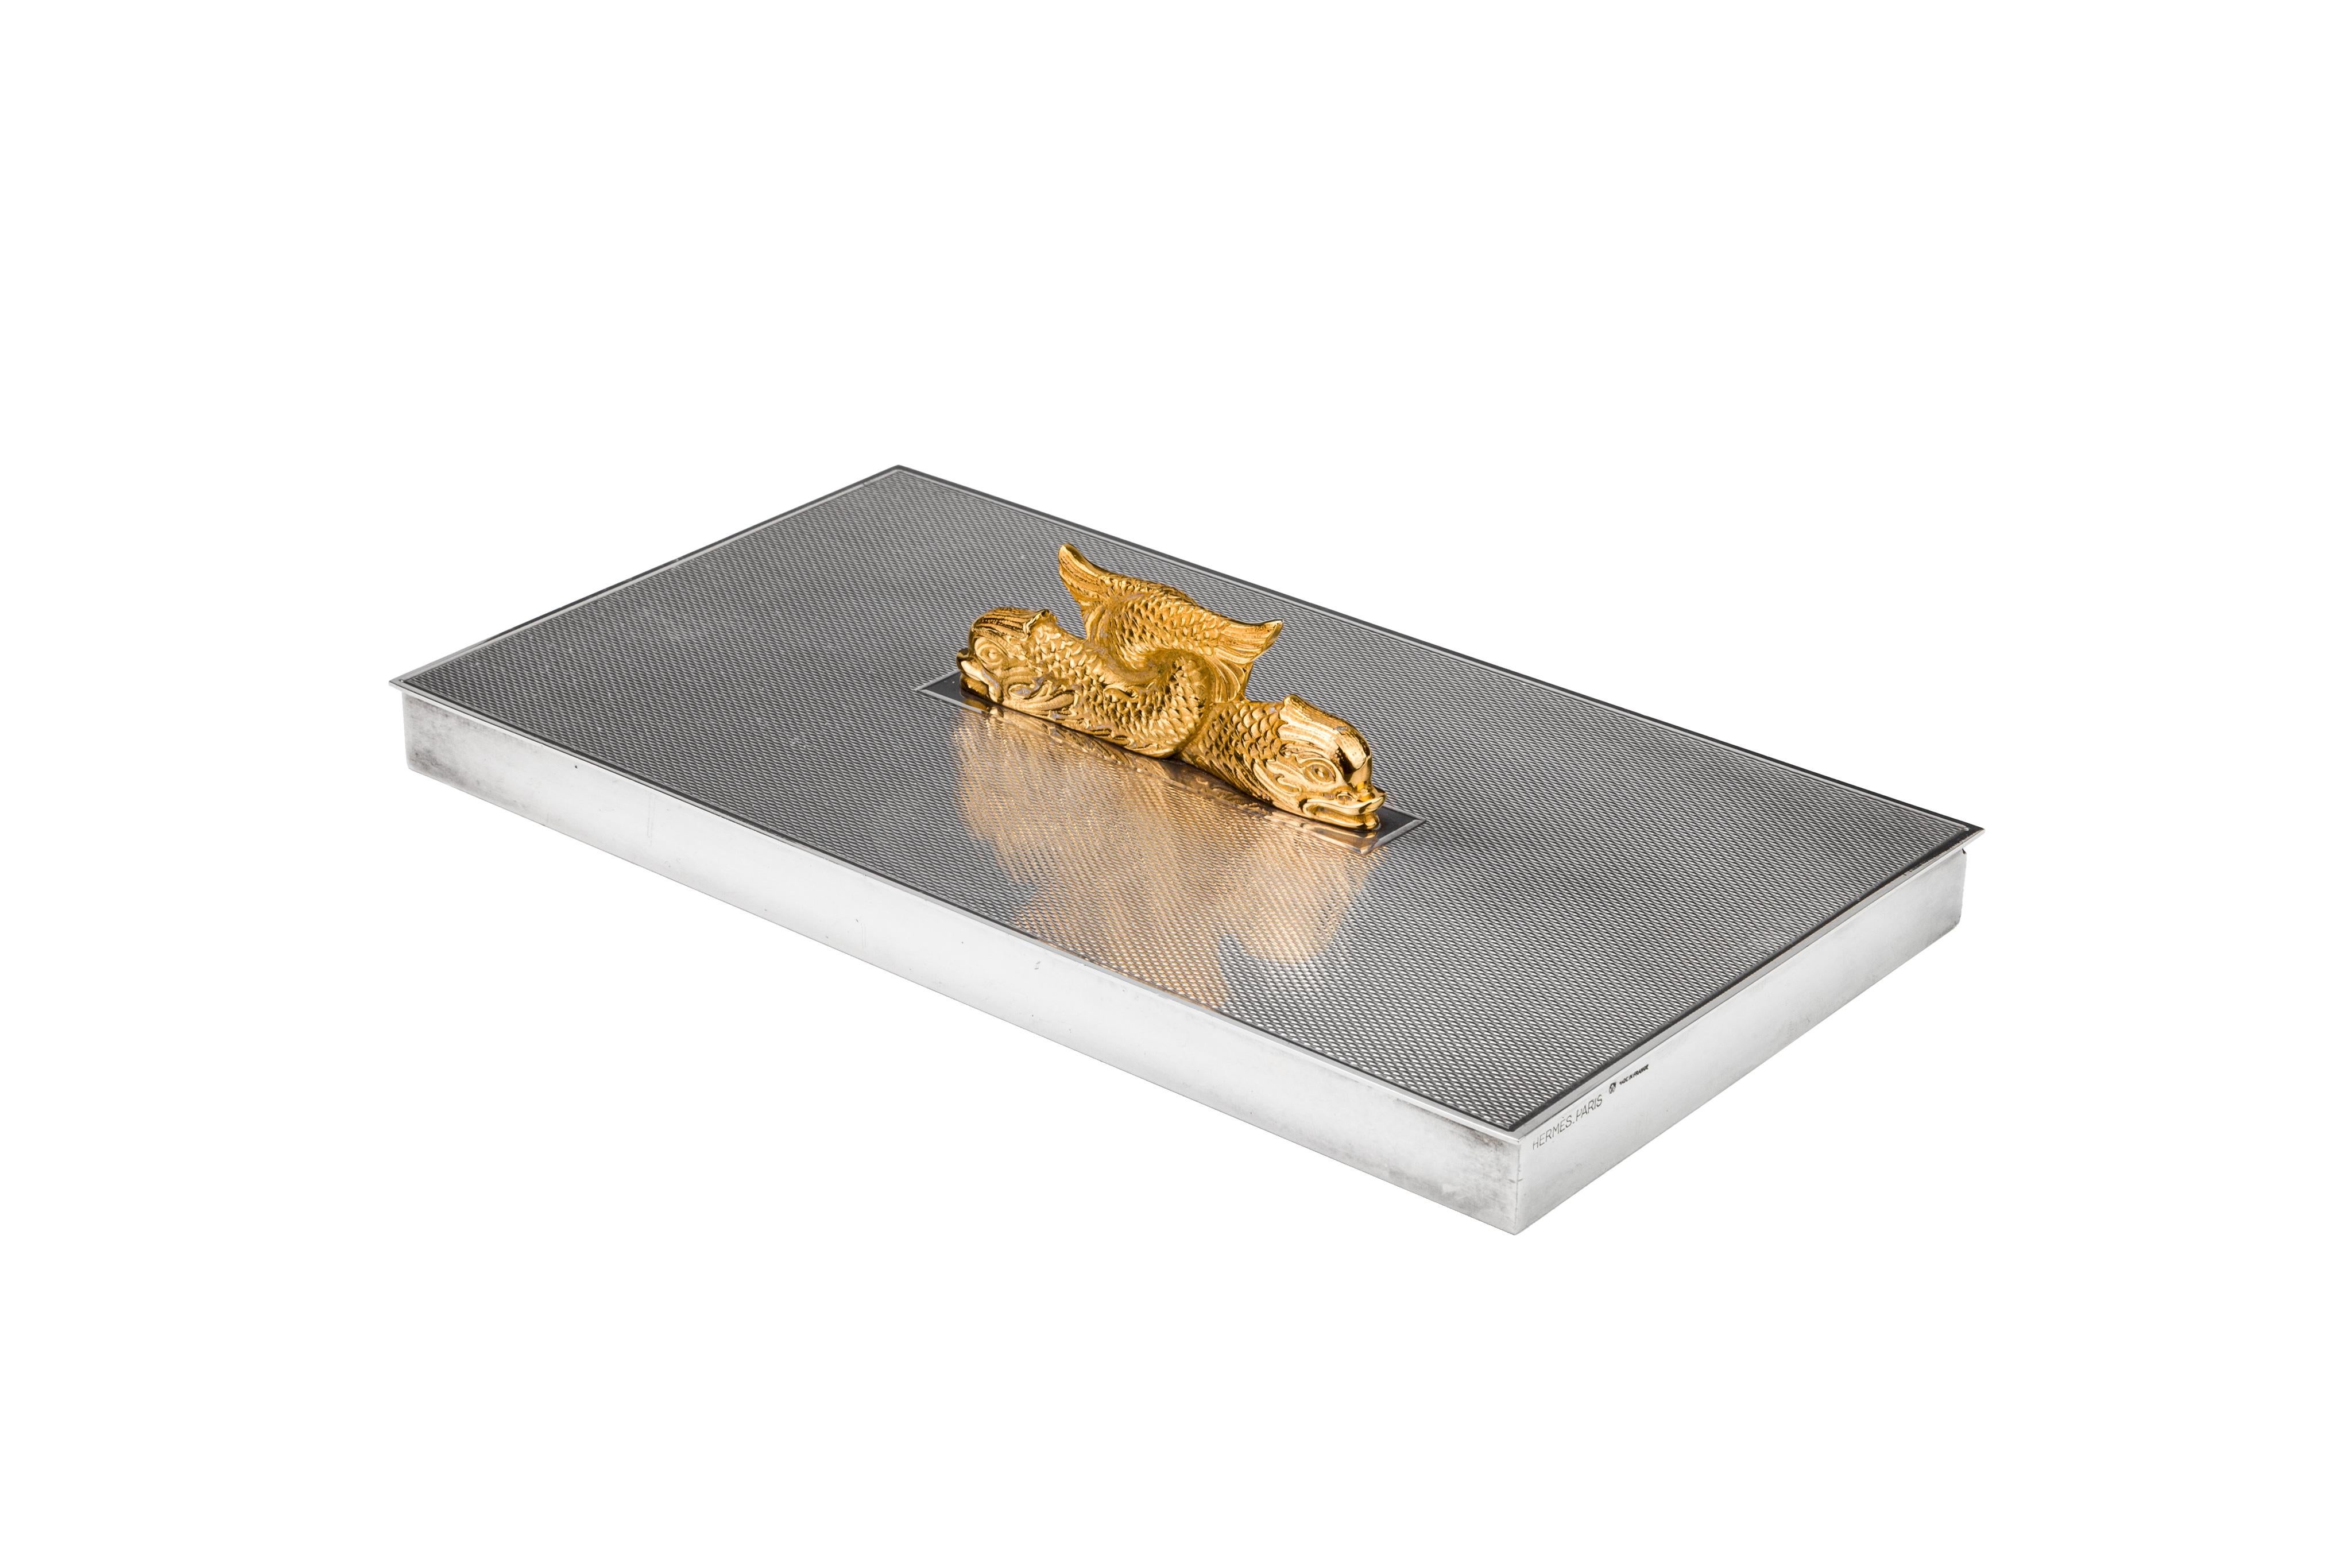 A fine and elegant box by Hermes with a set of gilted serpent's interlocking set atop. The top of the box is finished with an engine-turned texture.

Sleek and finely crafted. This will make a great addition to any surface.


 